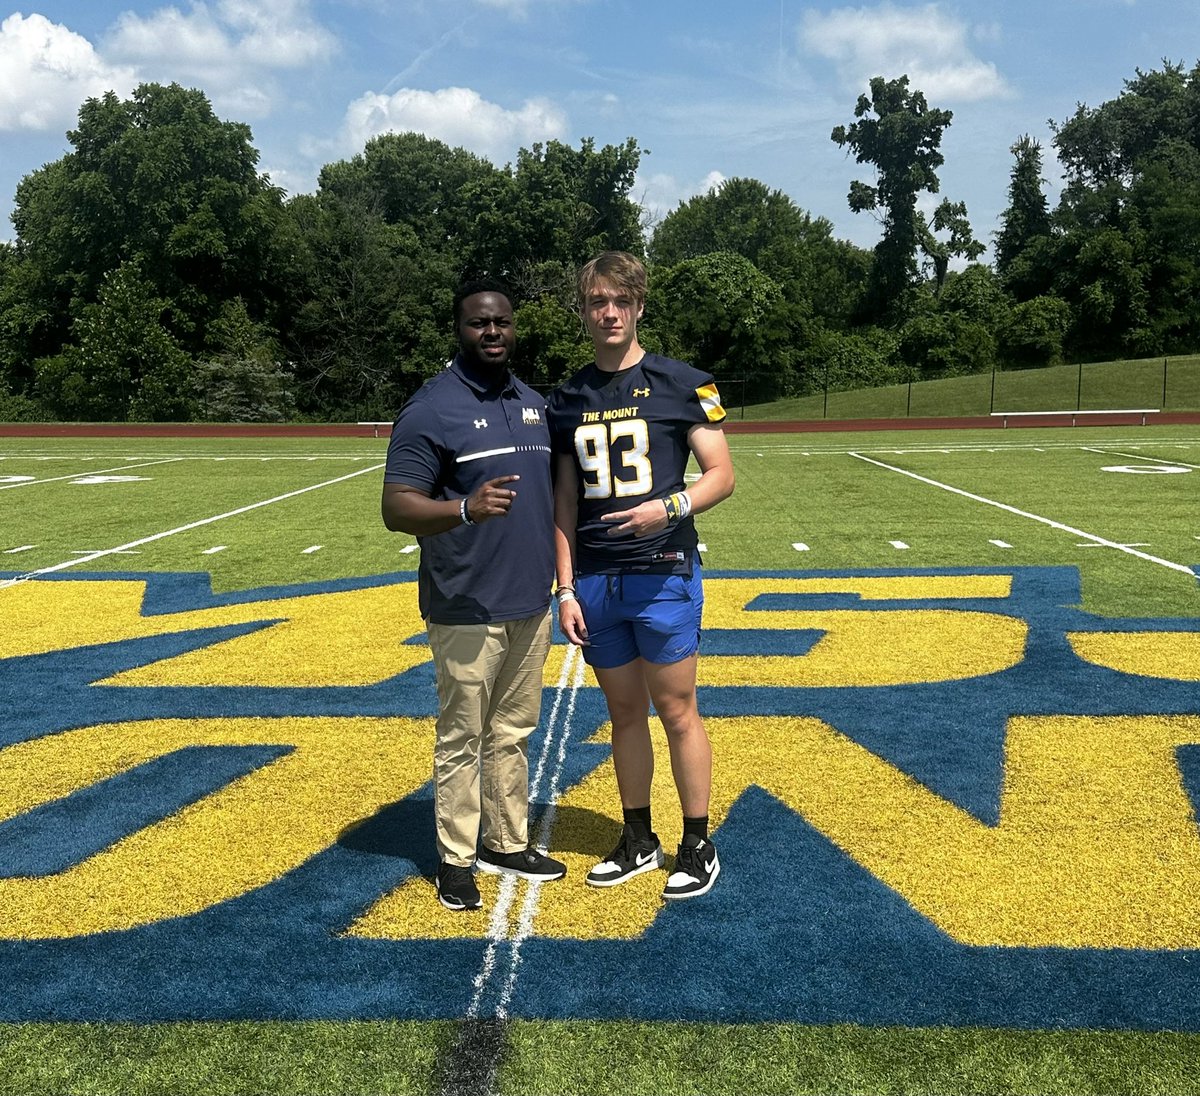 Had my first official visit at @MSJ_FB. Thank you @JT_FTF @CoachHopperton @CalebCorrill for the welcome and great tour of campus. It felt great wearing the jersey. #defendthemount #workwins @_AHS_Football @CoachEvanDreyer @coachveil @coach_dbrausch